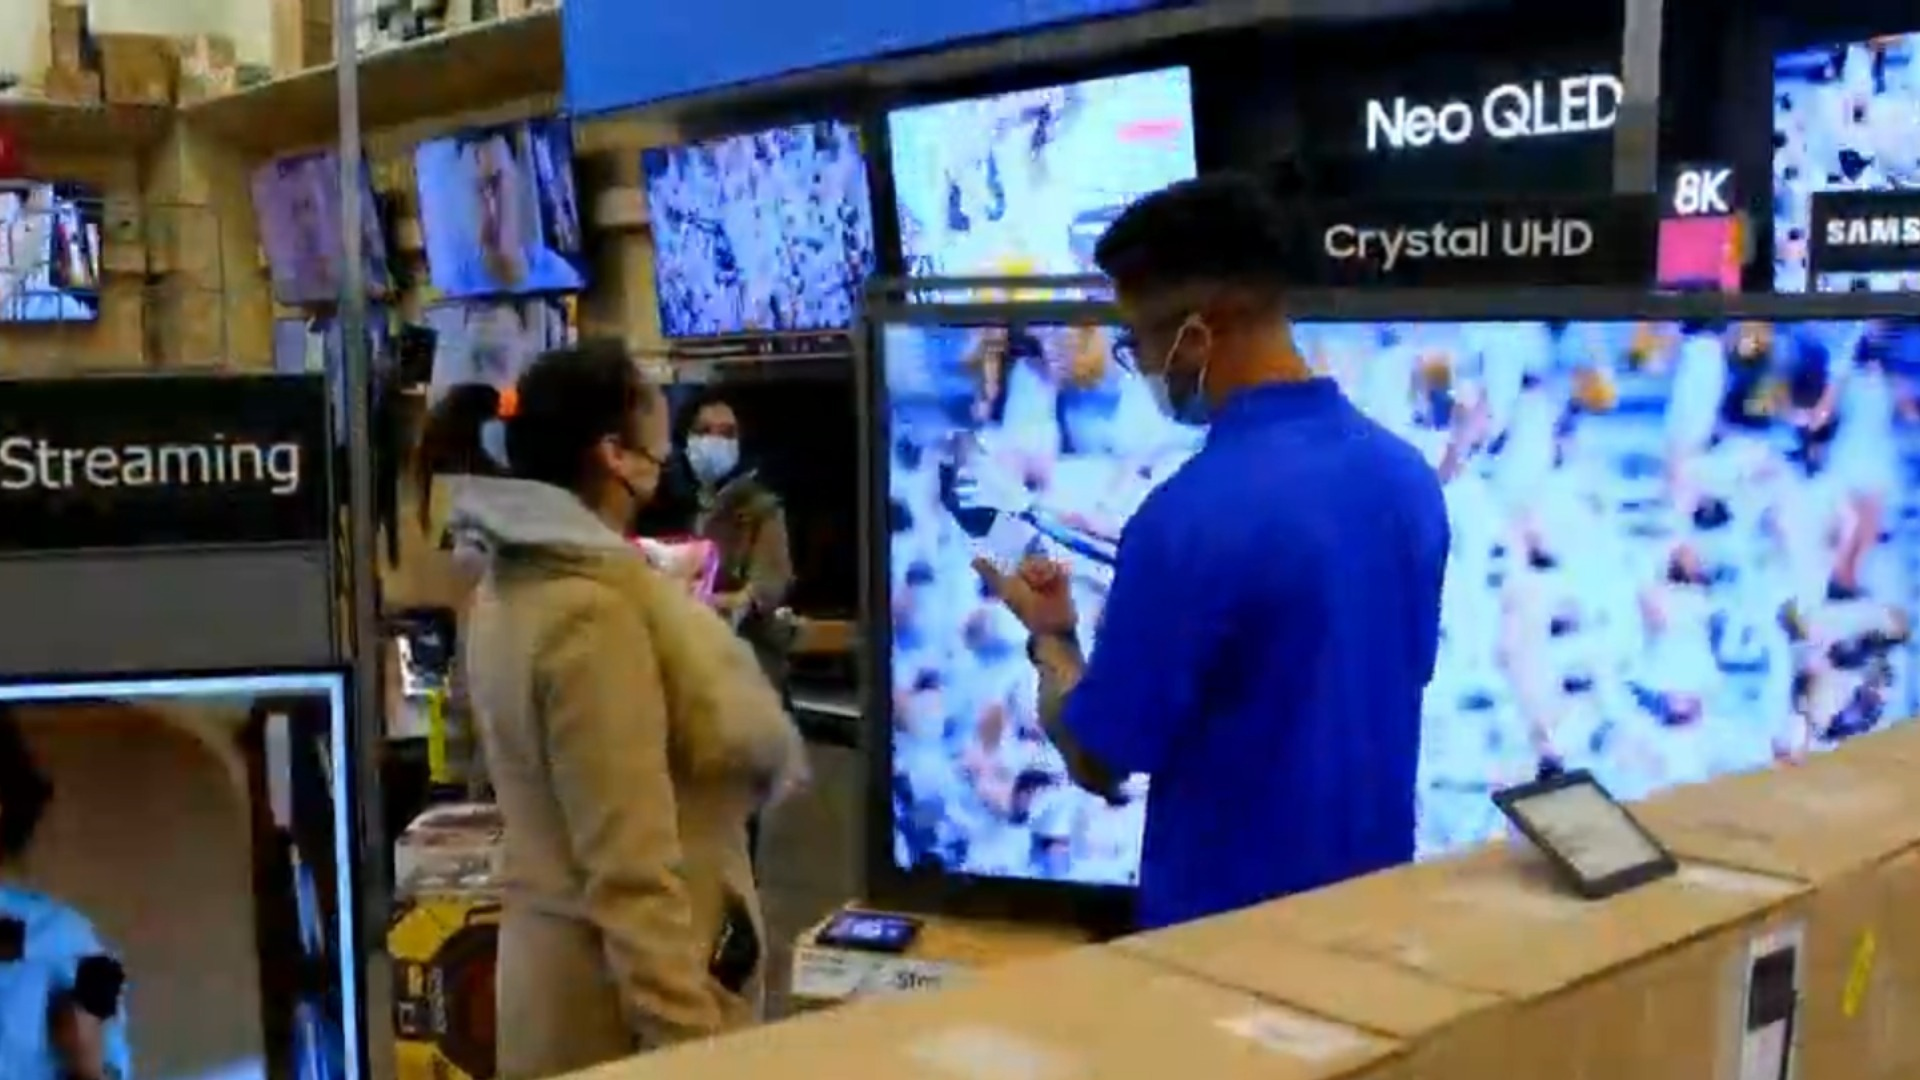 Watch CBS Evening News Shoppers expected to spend 9B on Black Friday